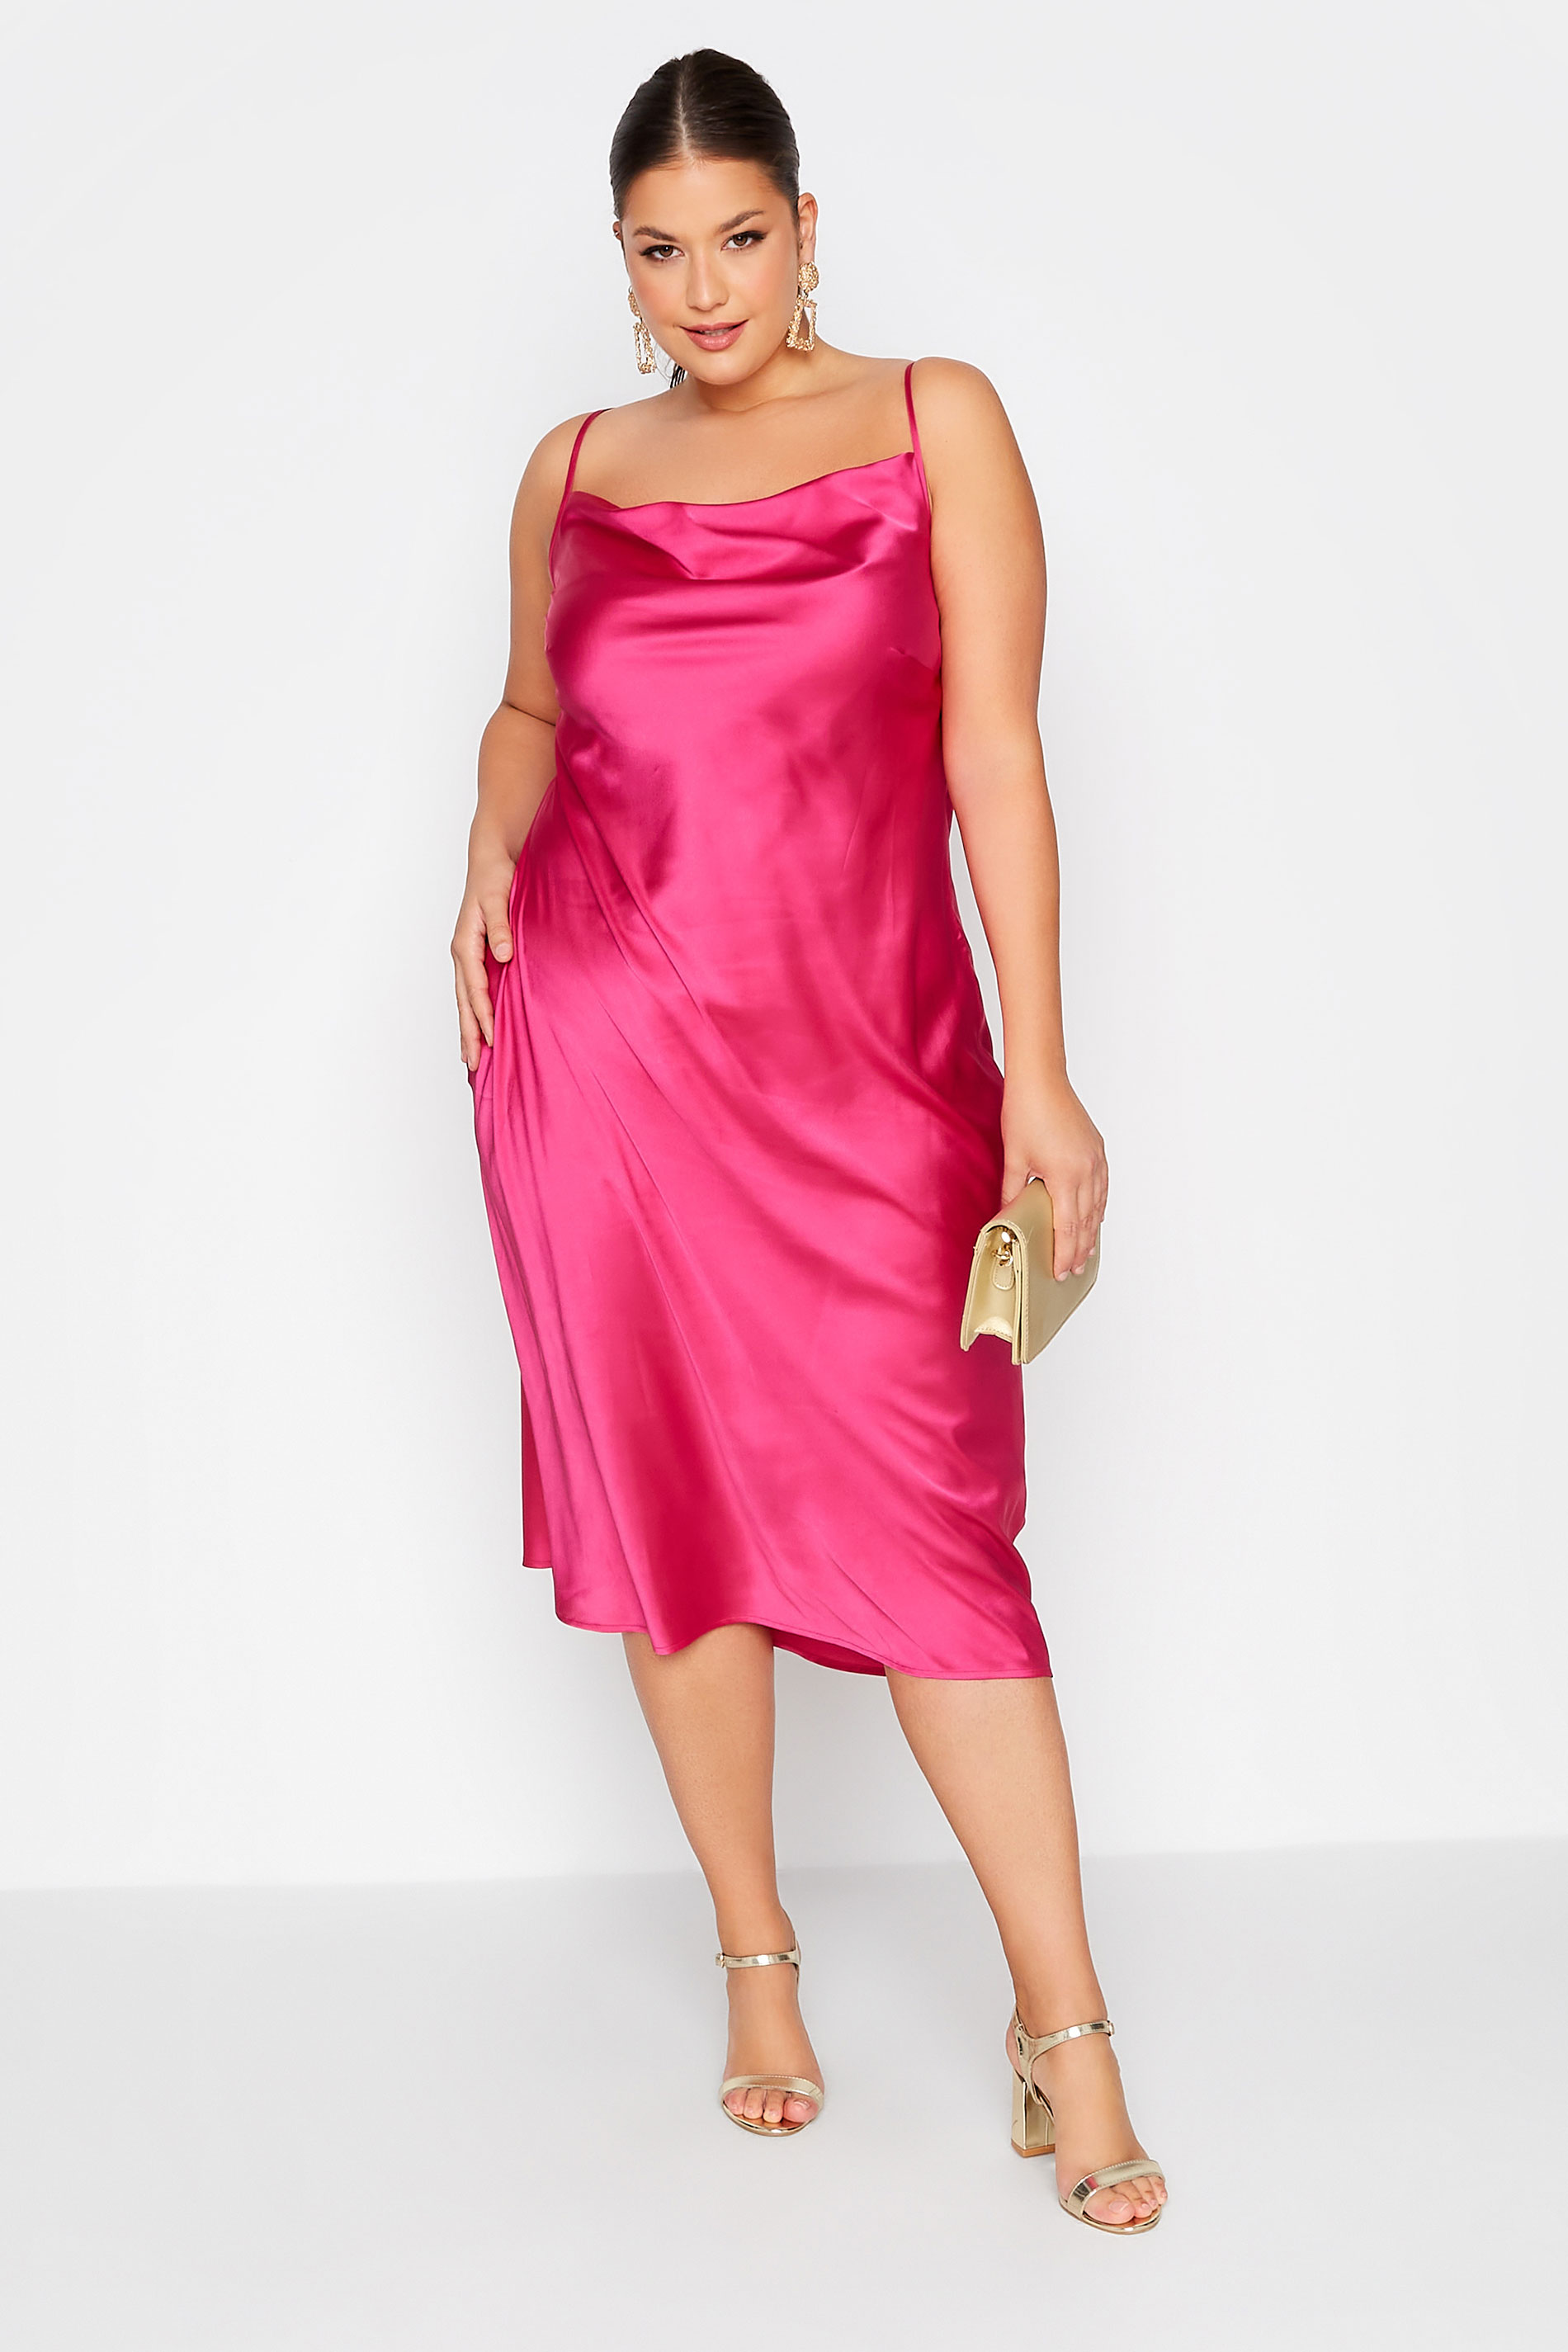 LIMITED COLLECTION Curve Pink Cowl Neck Satin Dress 1